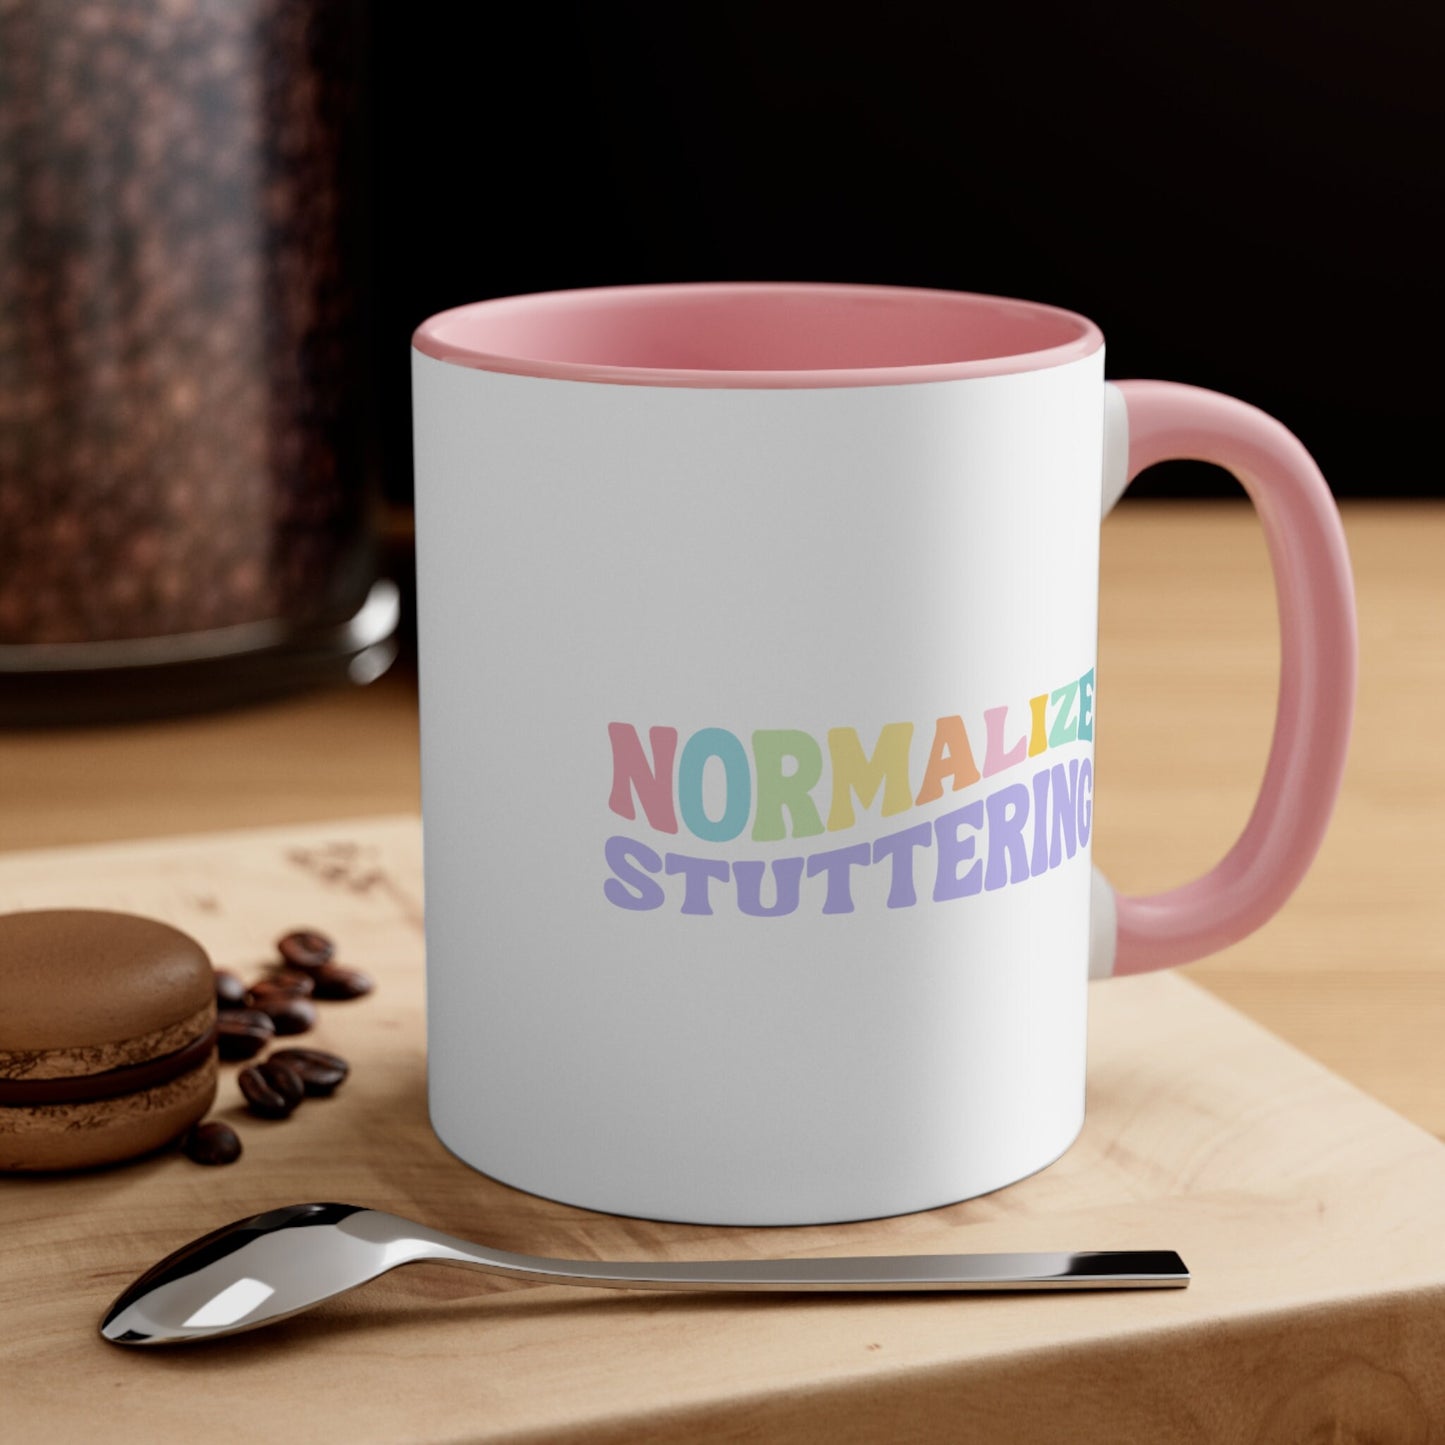 Normalize Stuttering Retro Wave Coffee Mug 11 or 15oz